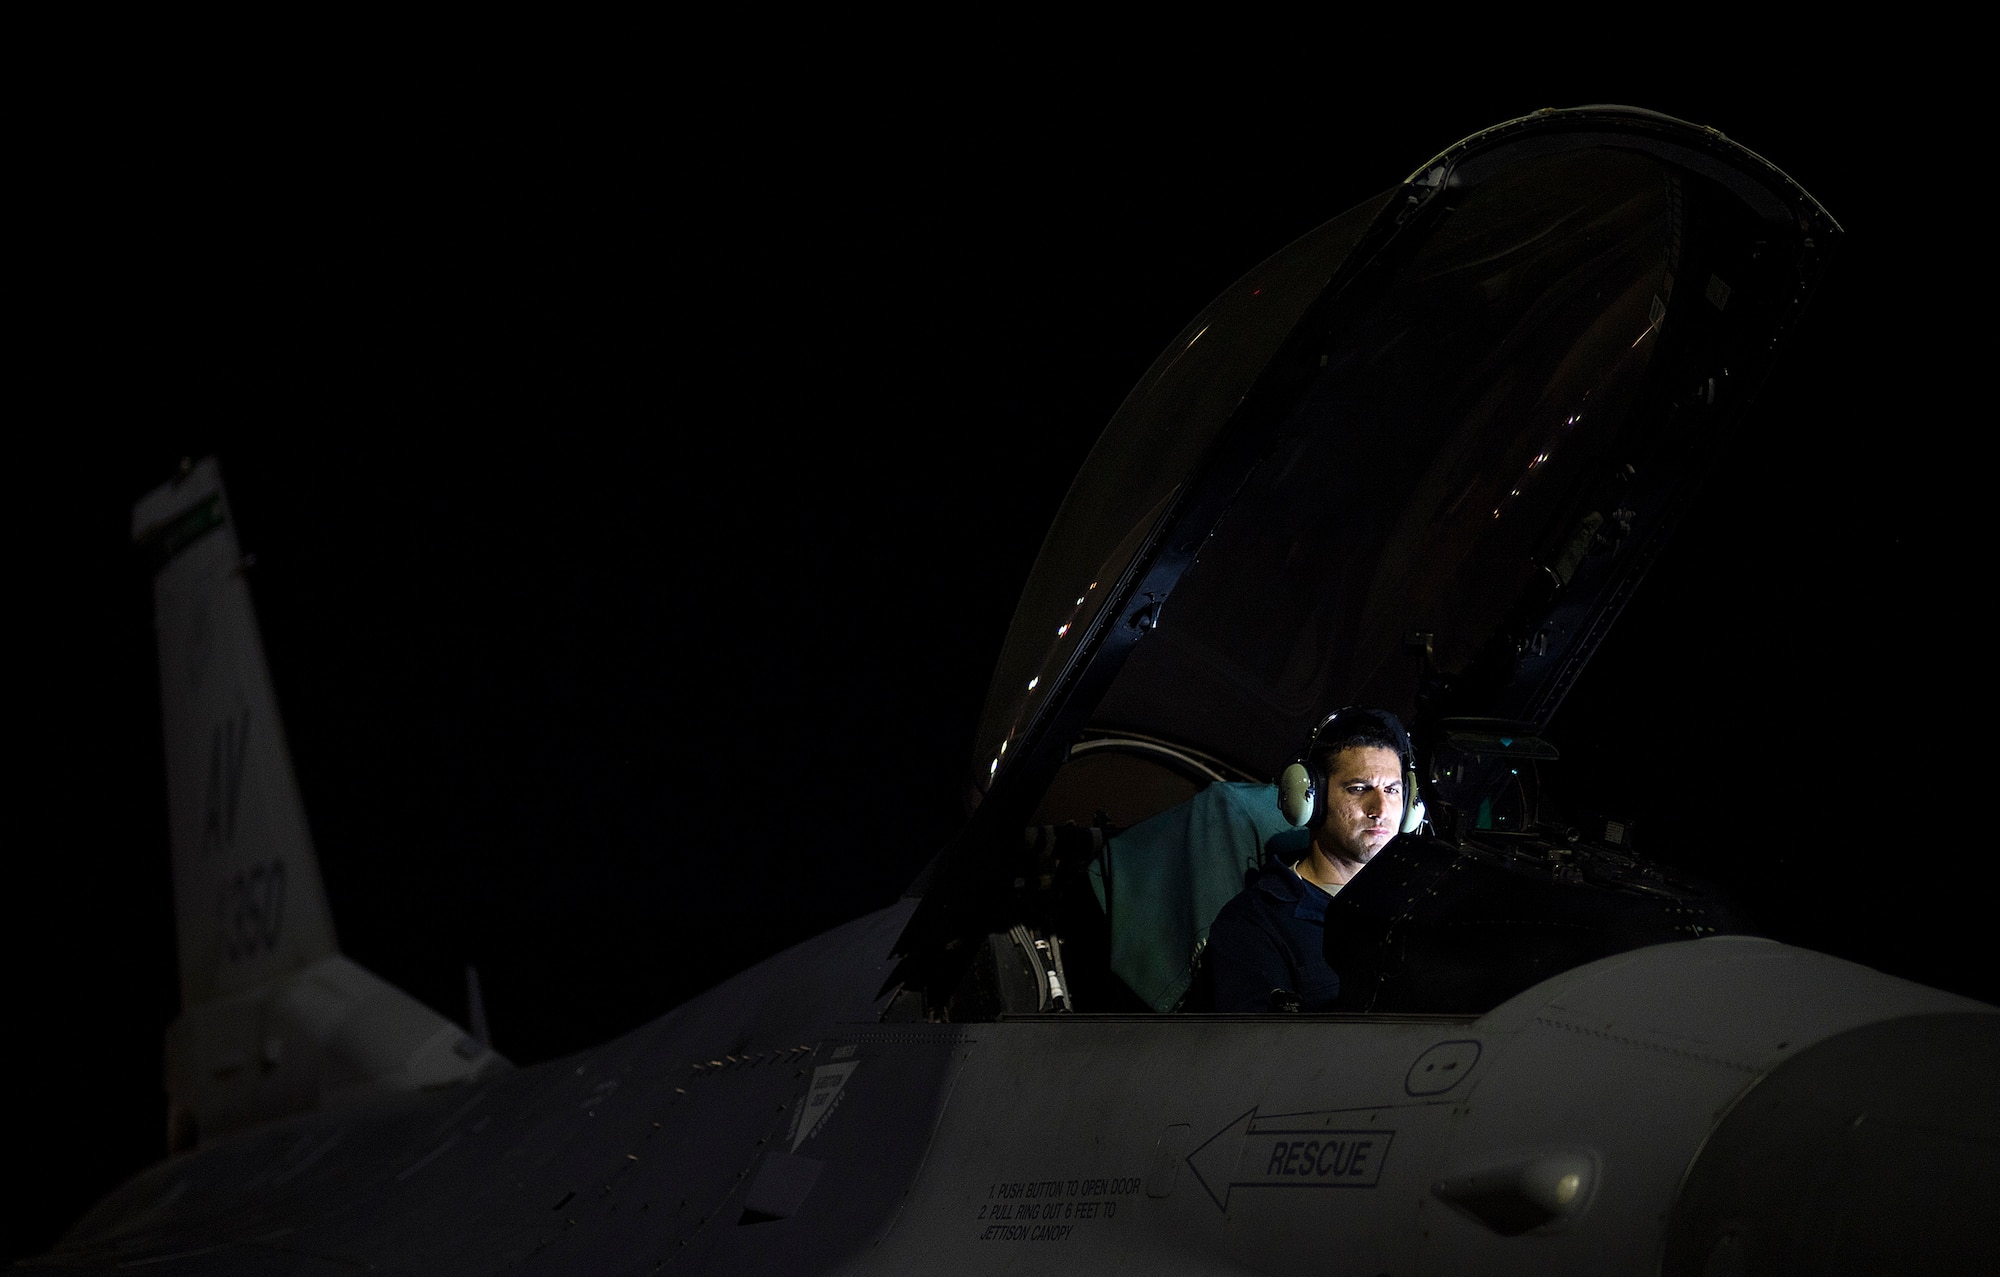 Staff Sgt. Erick Vega, an avionics specialist with the 555th Fighter Squadron out of Aviano Air Base, Italy, attempts to determine if his equipment is failing, or if the space systems aboard the F-16 Fighting Falcon is being attacked by simulated enemy forces through space warfare during exercise Red Flag at Nellis Air Force Base, Nevada, July 21, 2016. Red Flag 16-3 is aimed at teaching service members how to integrate air, space and cyberspace elements. (U.S. Air Force photo/Tech. Sgt. David Salanitri)